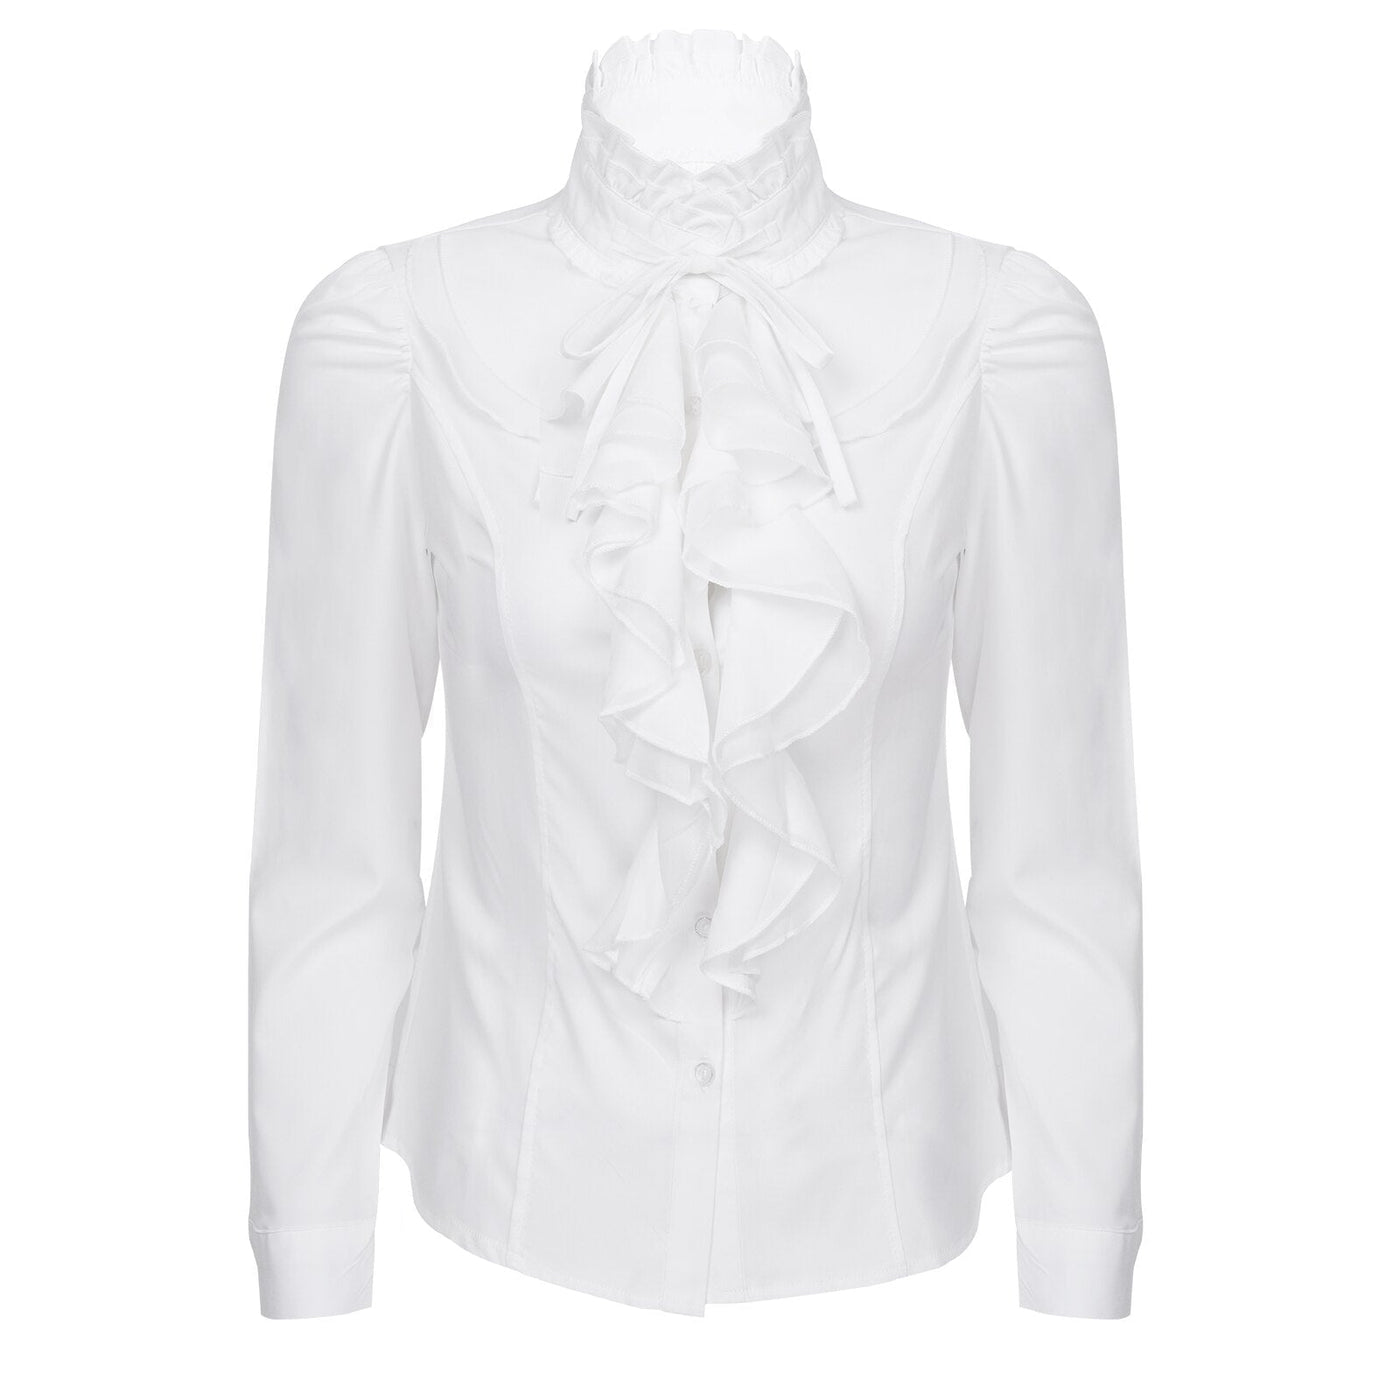 Chemise blanche luxe femme vintage